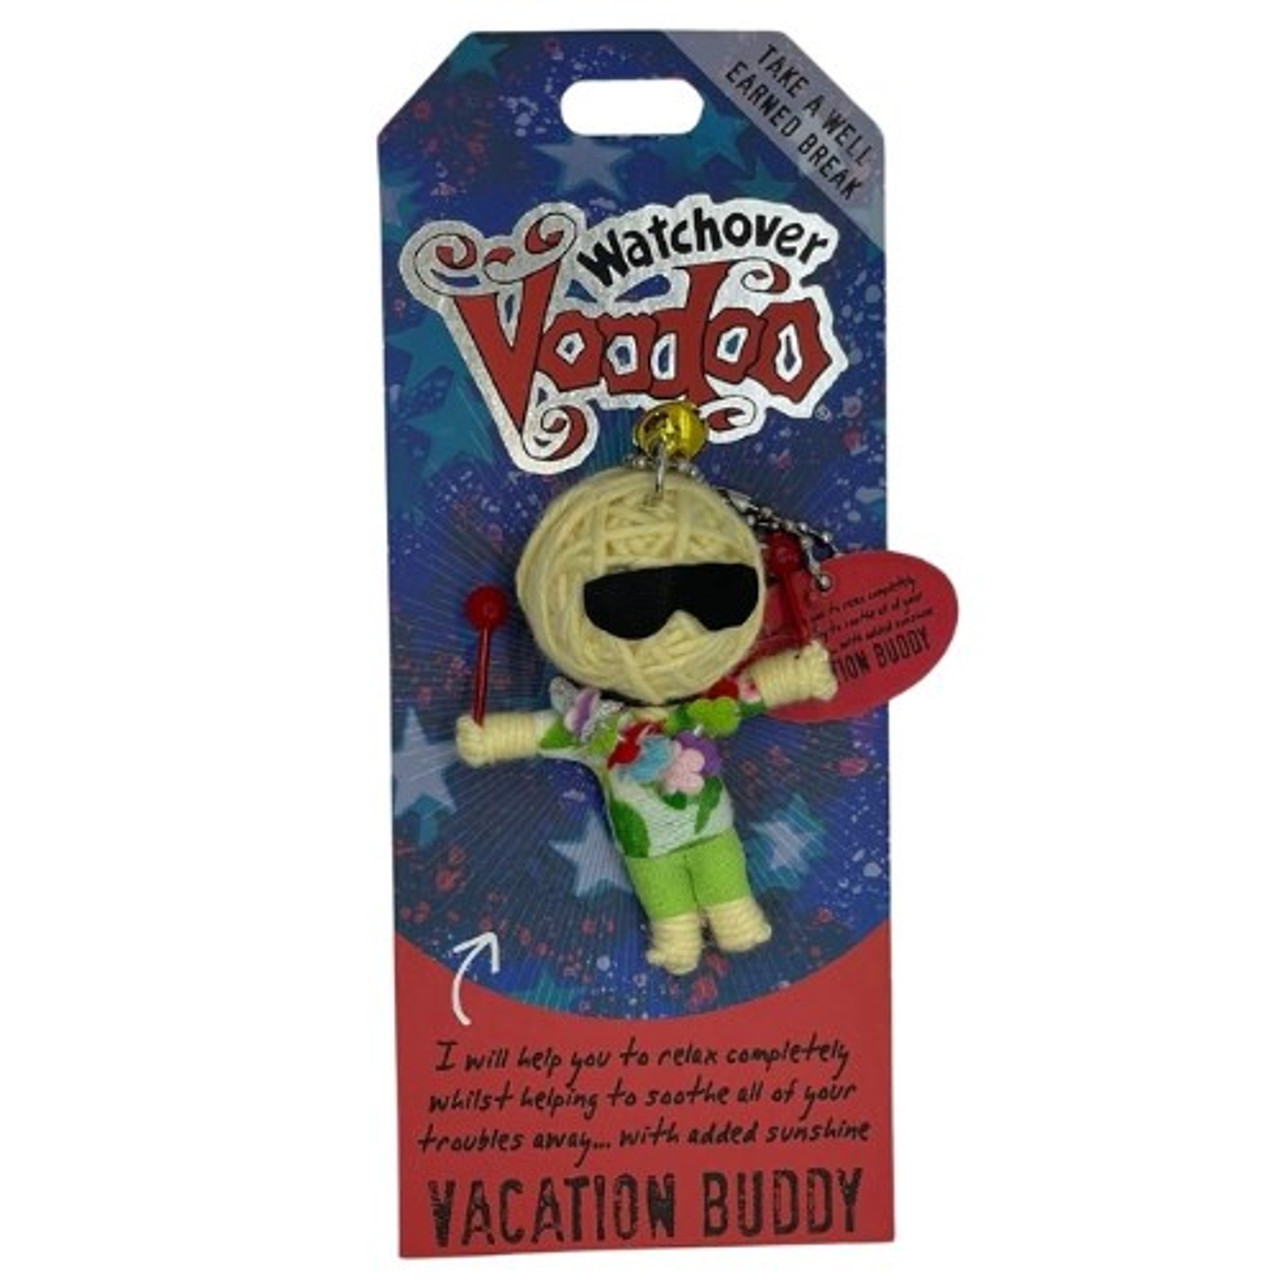 Watchover Voodoo Doll Keychains - Select